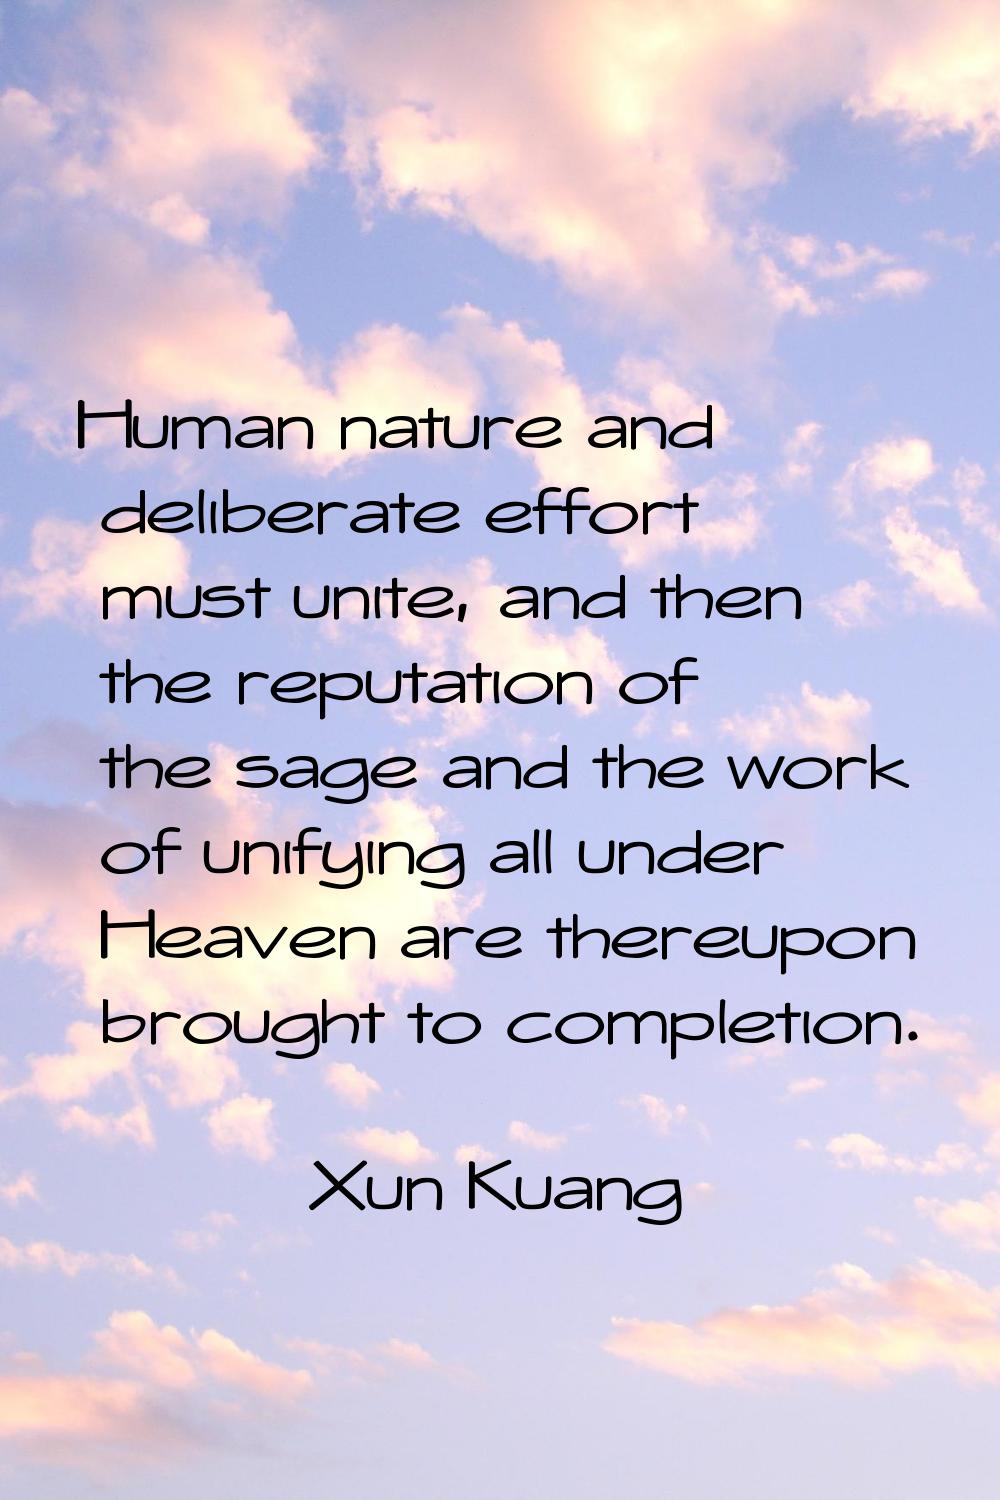 Human nature and deliberate effort must unite, and then the reputation of the sage and the work of 